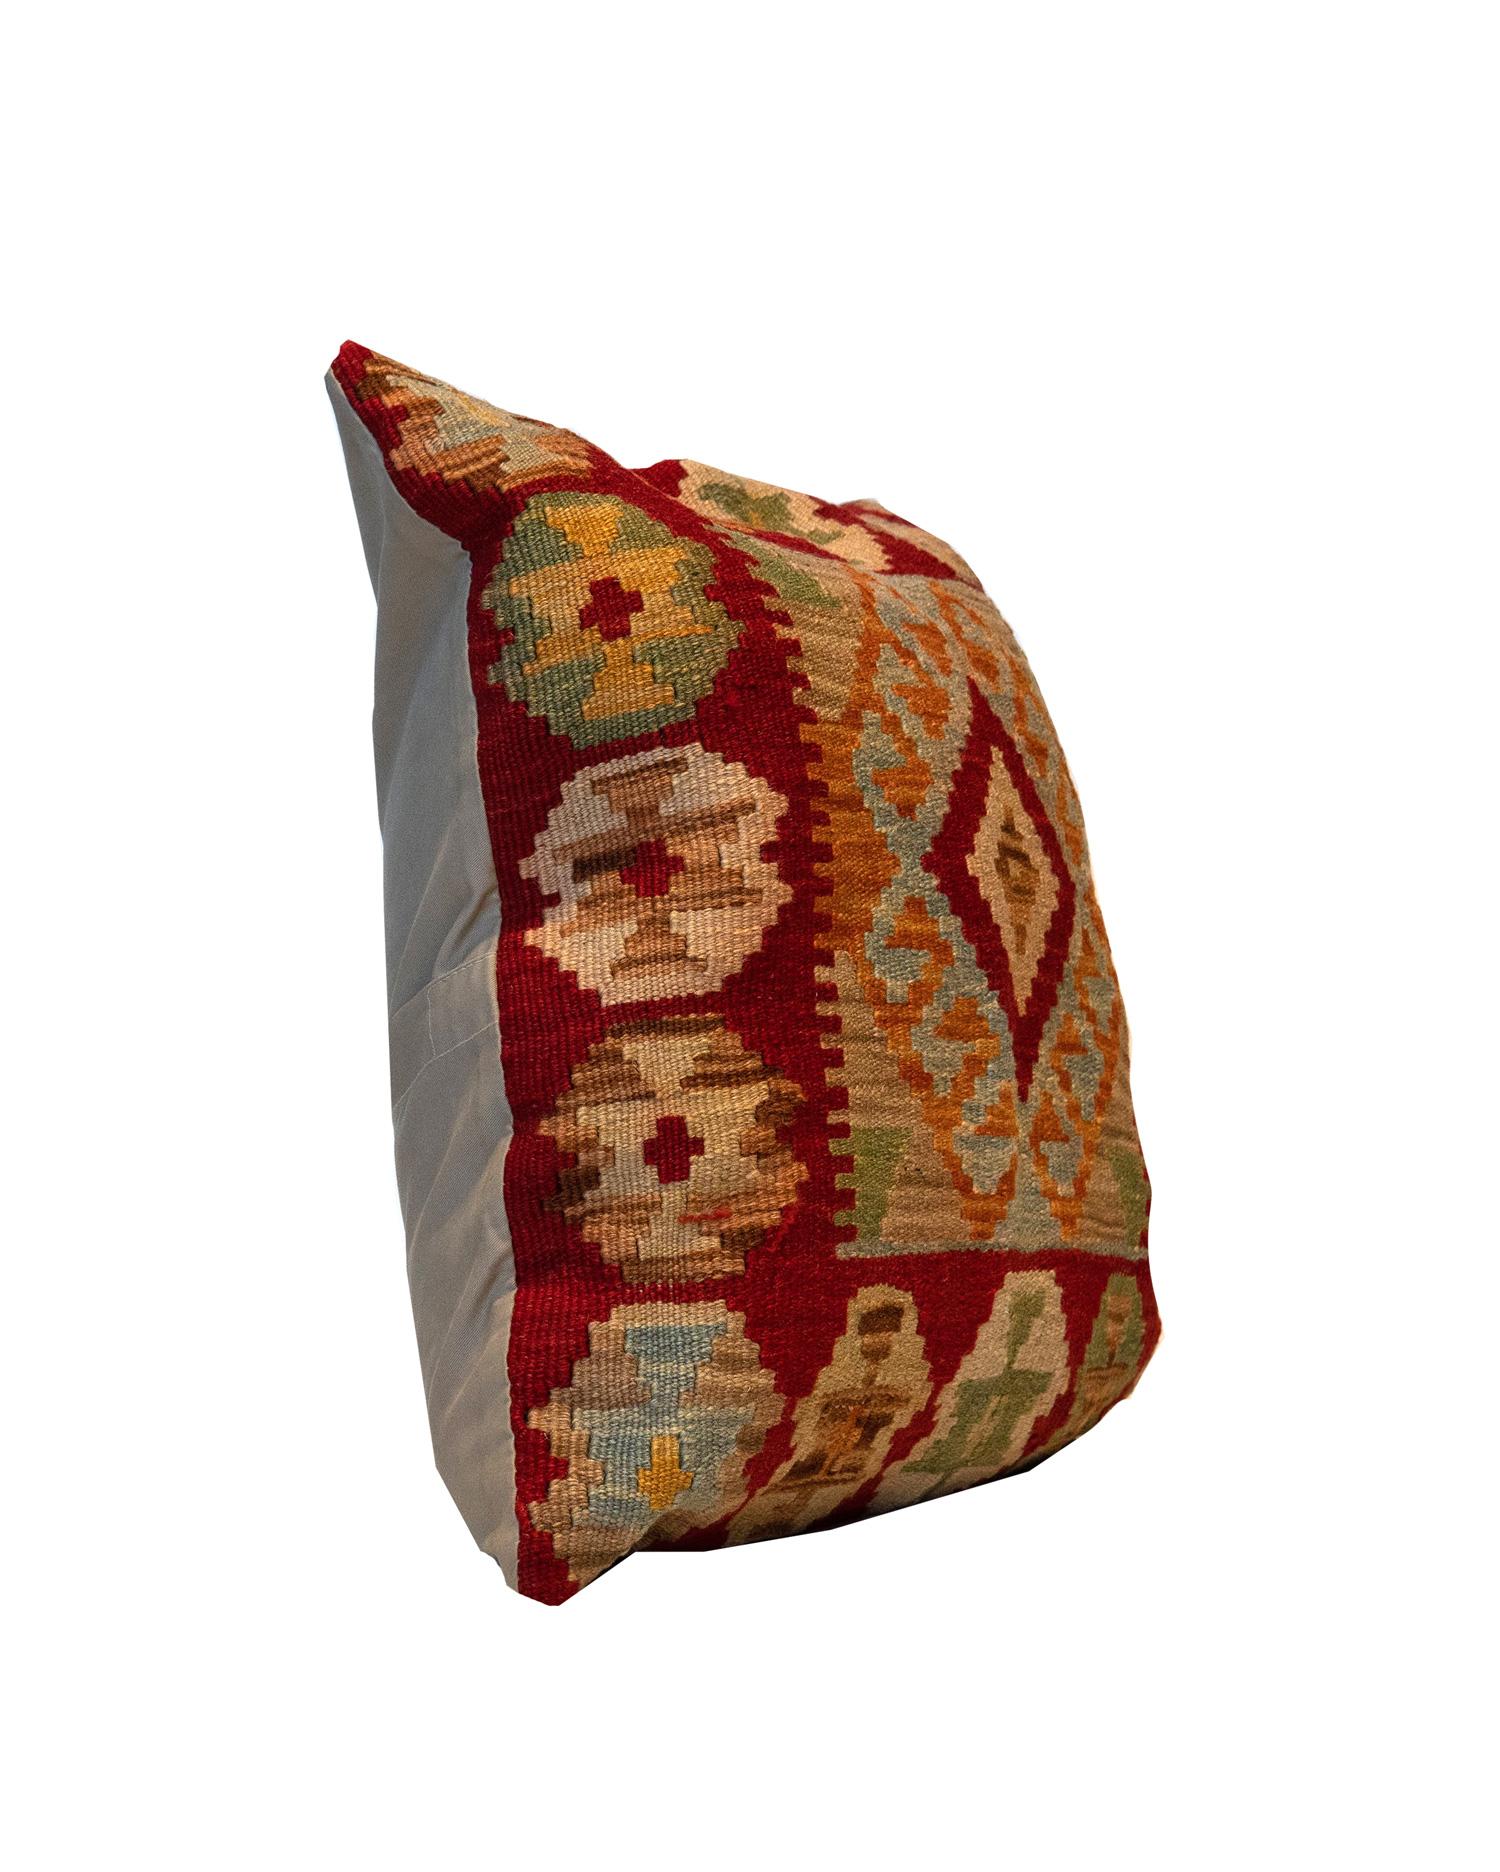 Late 20th Century Red Beige Wool Geometric Kilim Cushion Cover Handmade Oriental Scatter Pillow